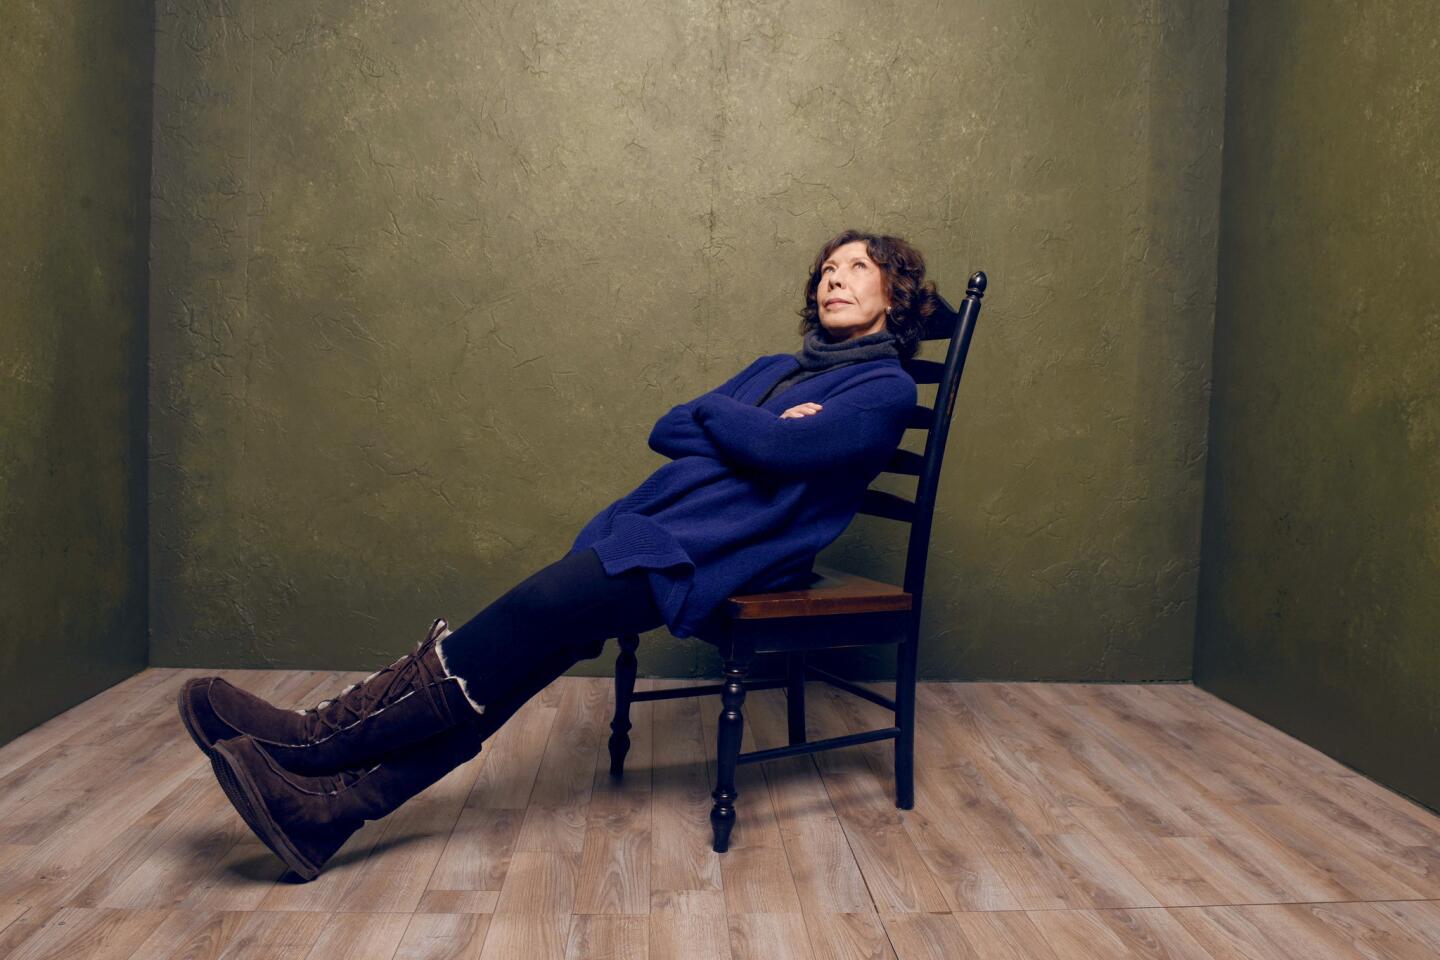 Actress Lily Tomlin of "Grandma" poses for a portrait at the Village at the Lift during the 2015 Sundance Film Festival.